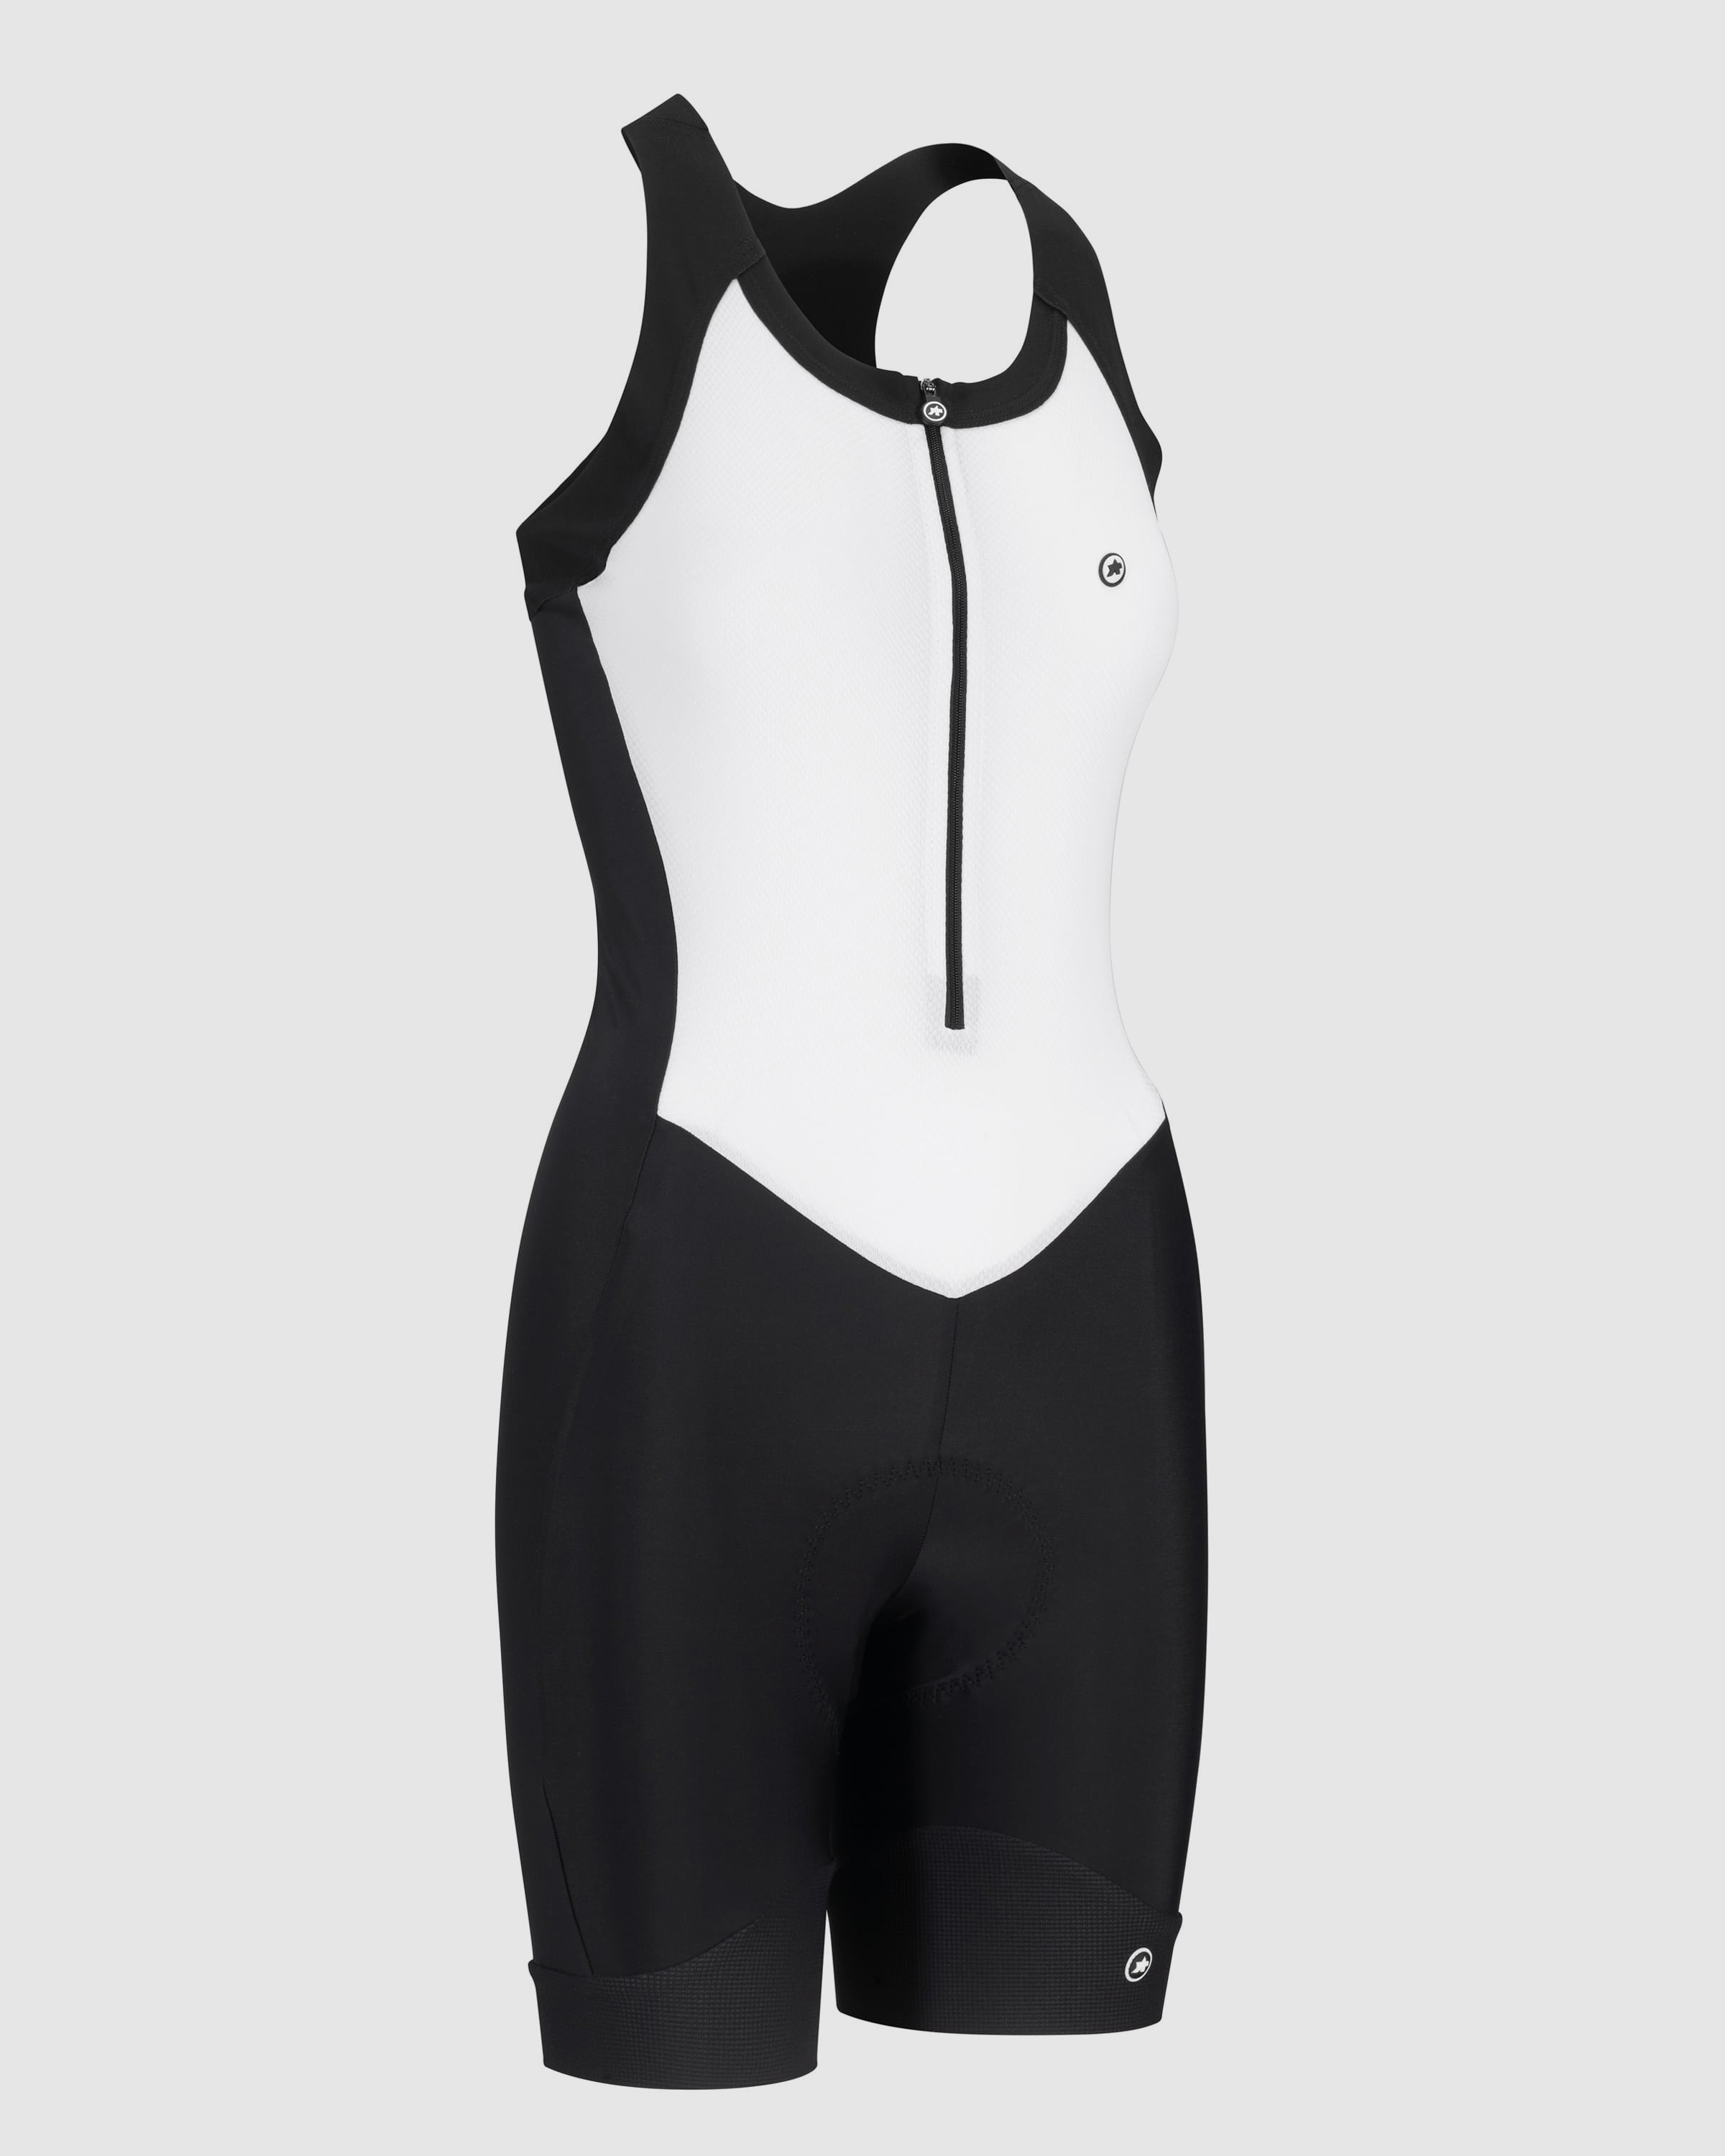 UMA GT NS Body Suit - ASSOS Of Switzerland - Official Outlet